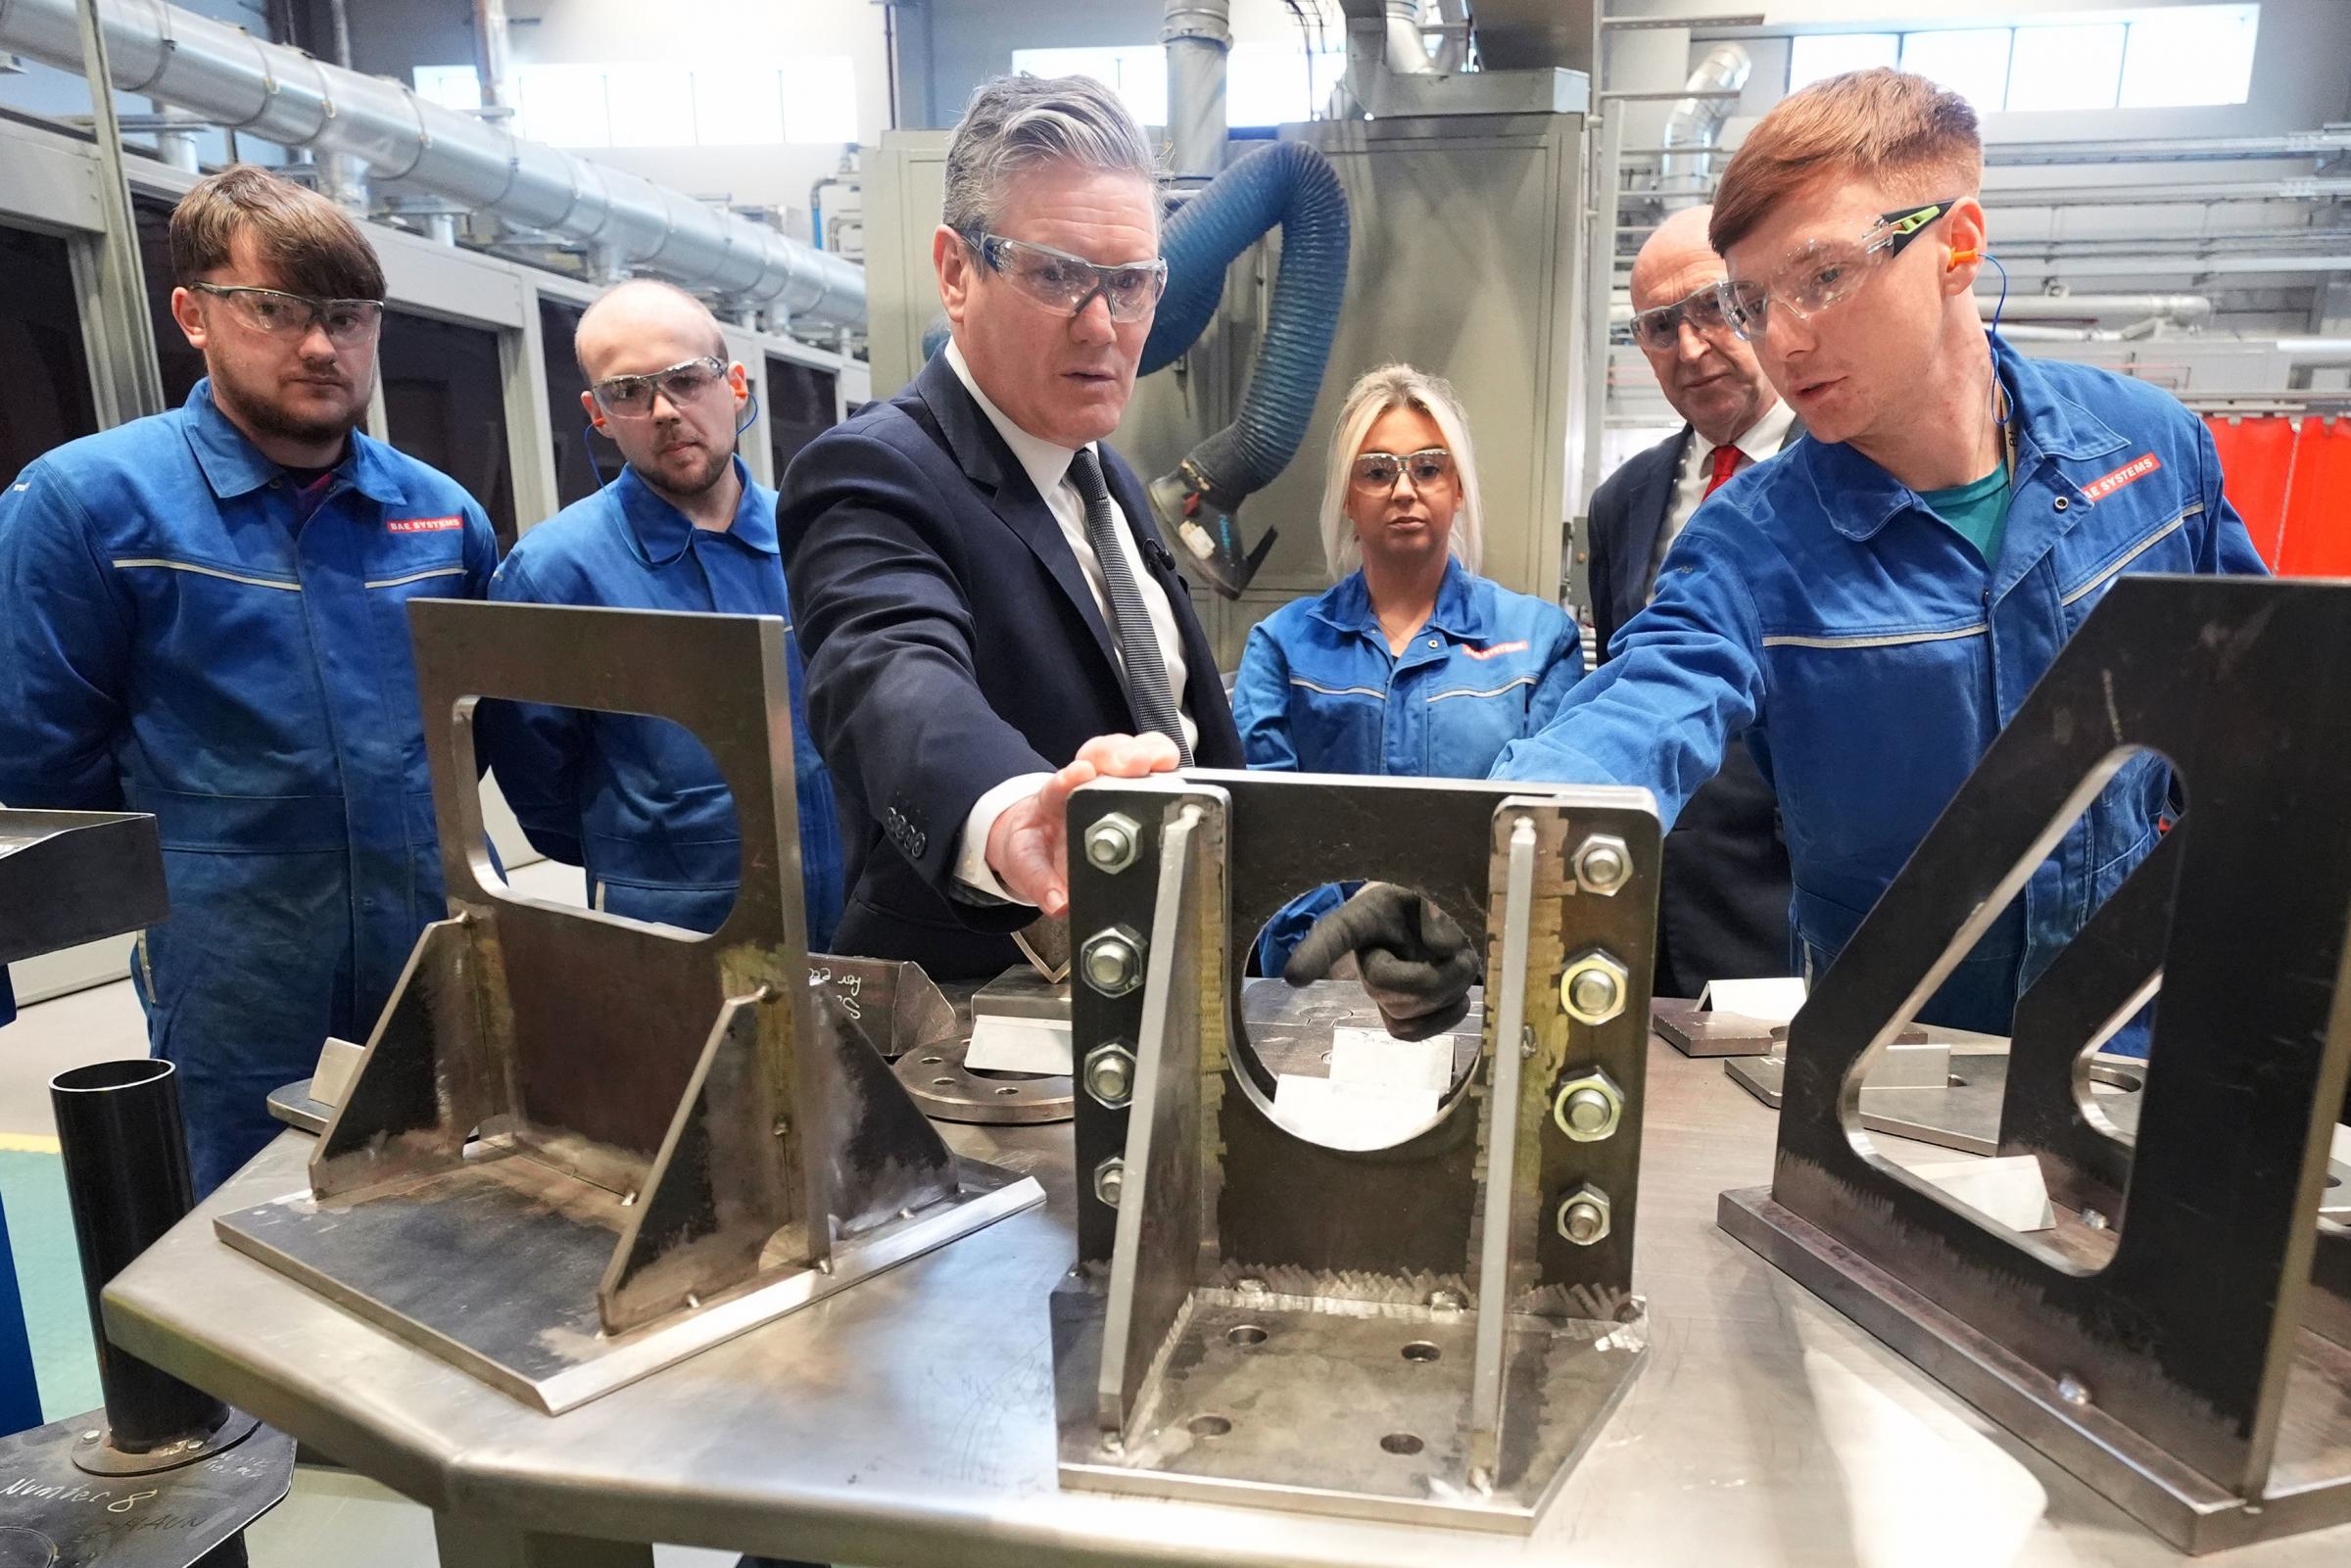 Labour Party leader Sir Keir Starmer talking to workers whilst looking at metalwork during a campaign visit to BAE Systems in Barrow-in-Furness, Cumbria. The Labour leader has said the UKs nuclear deterrent is the bedrock of his plan to keep